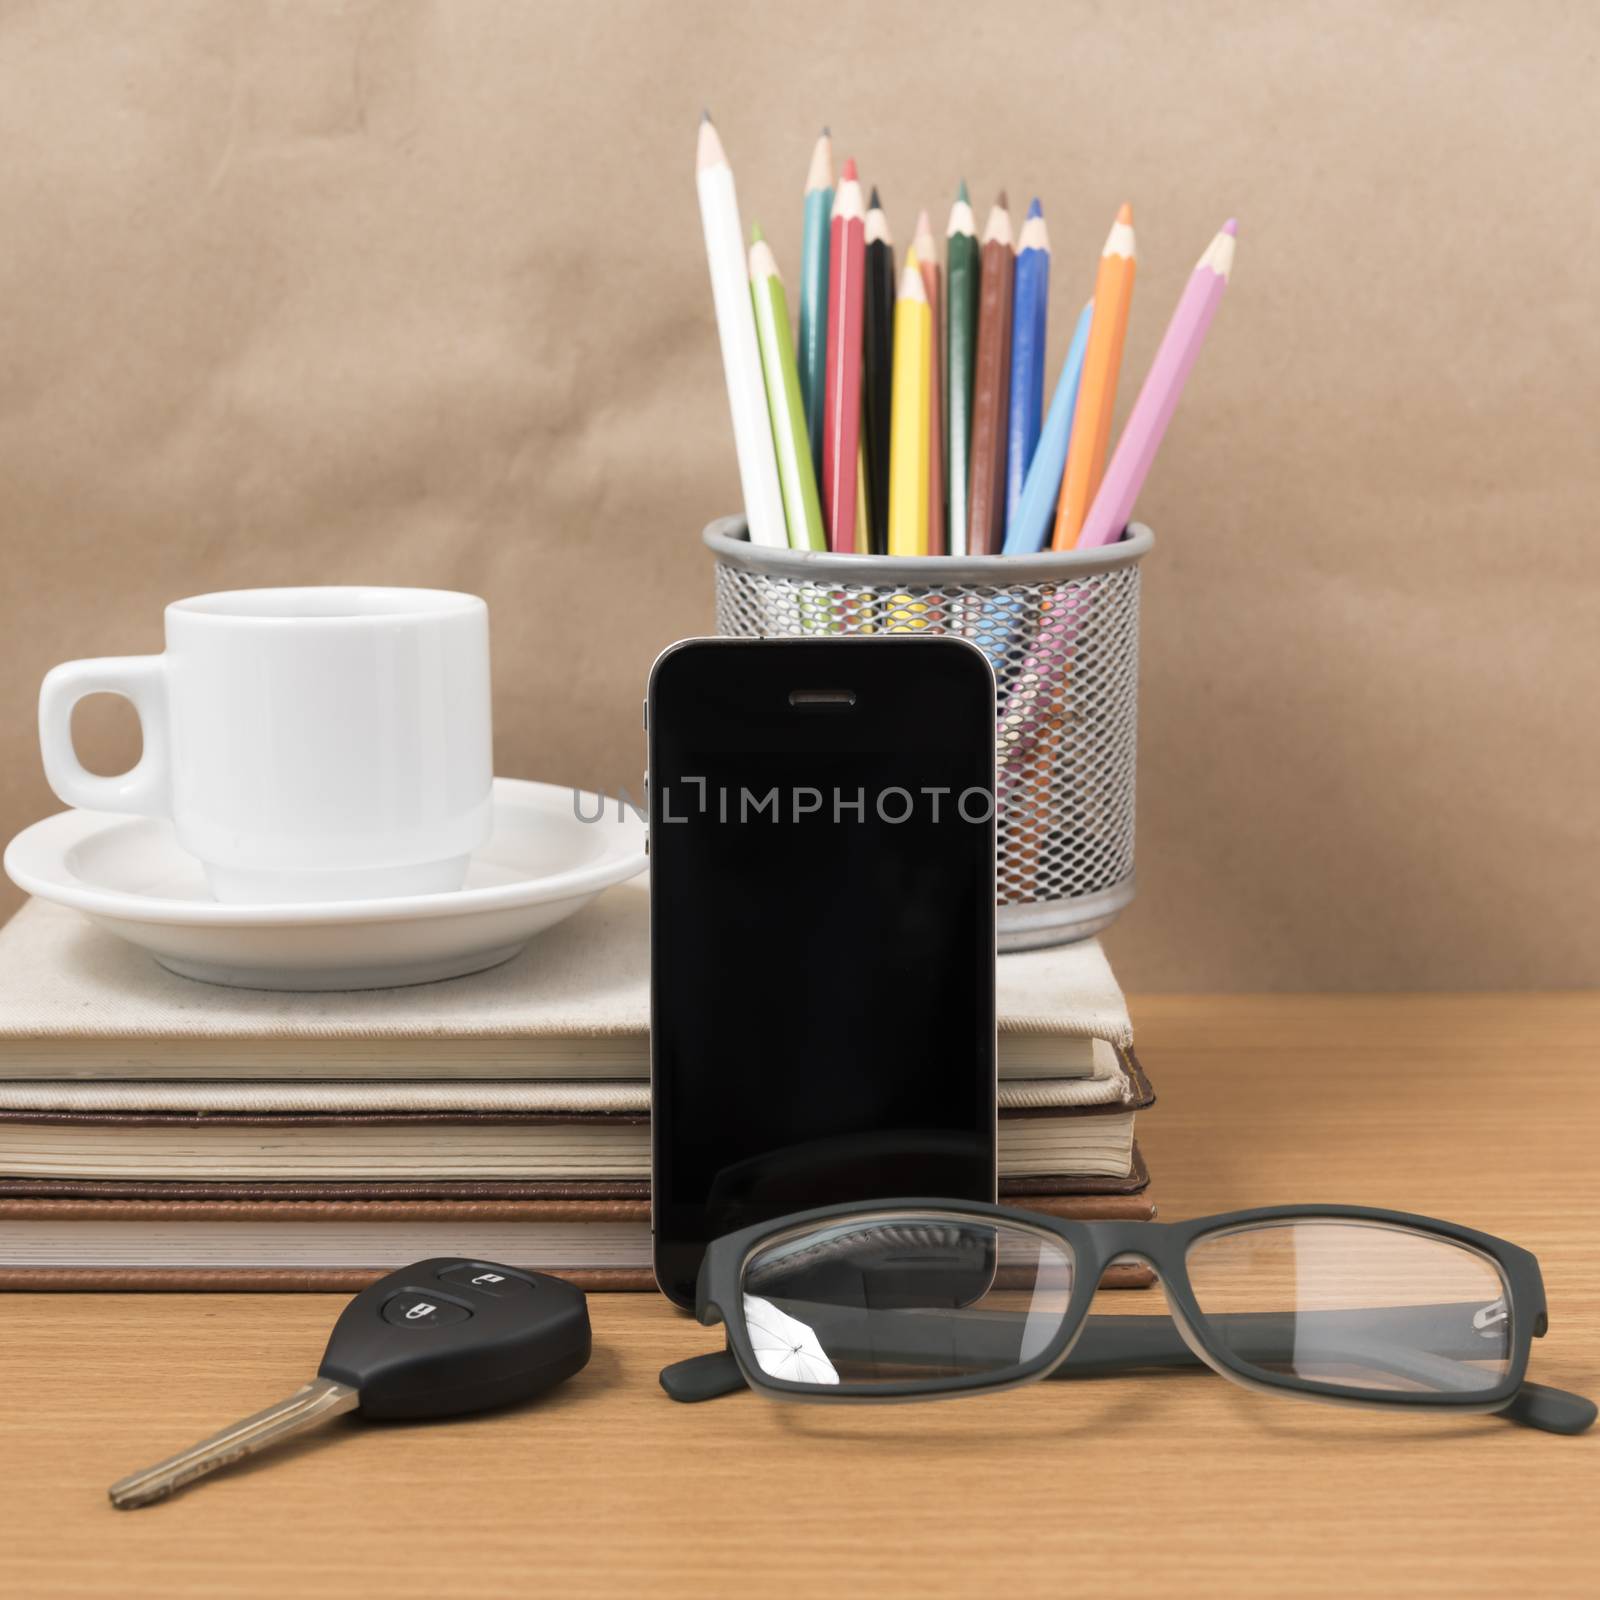 office desk : coffee and phone with car key,eyeglasses,stack of  by ammza12